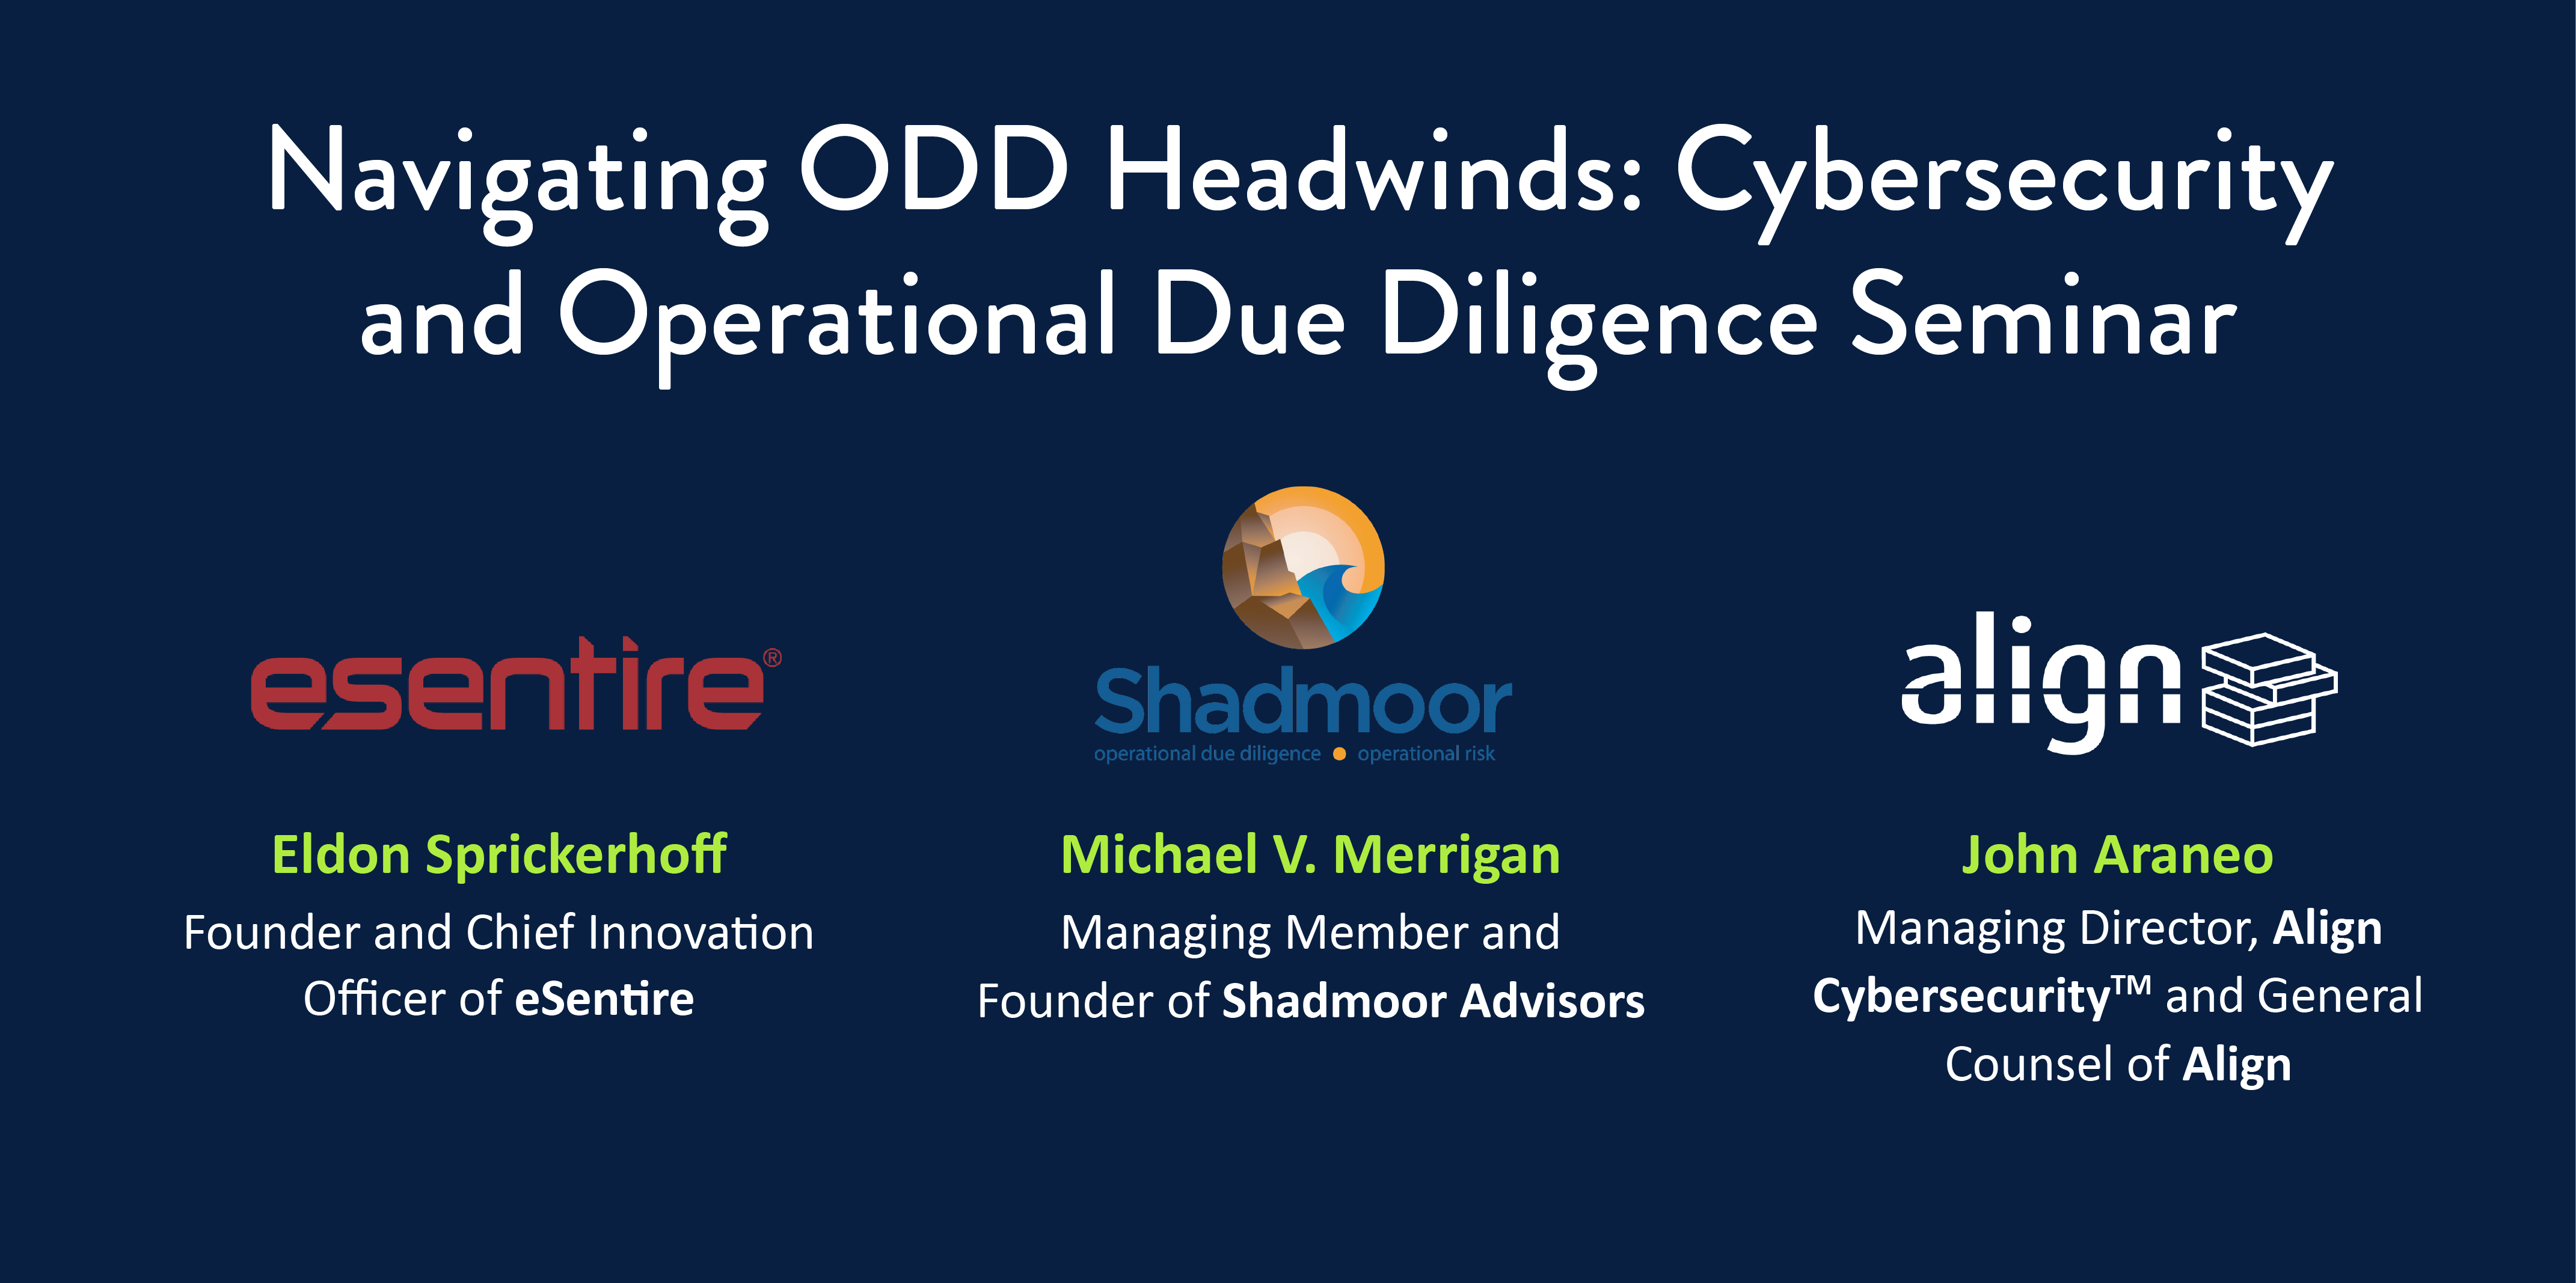 Cybersecurity and Operational Due Diligence Seminar